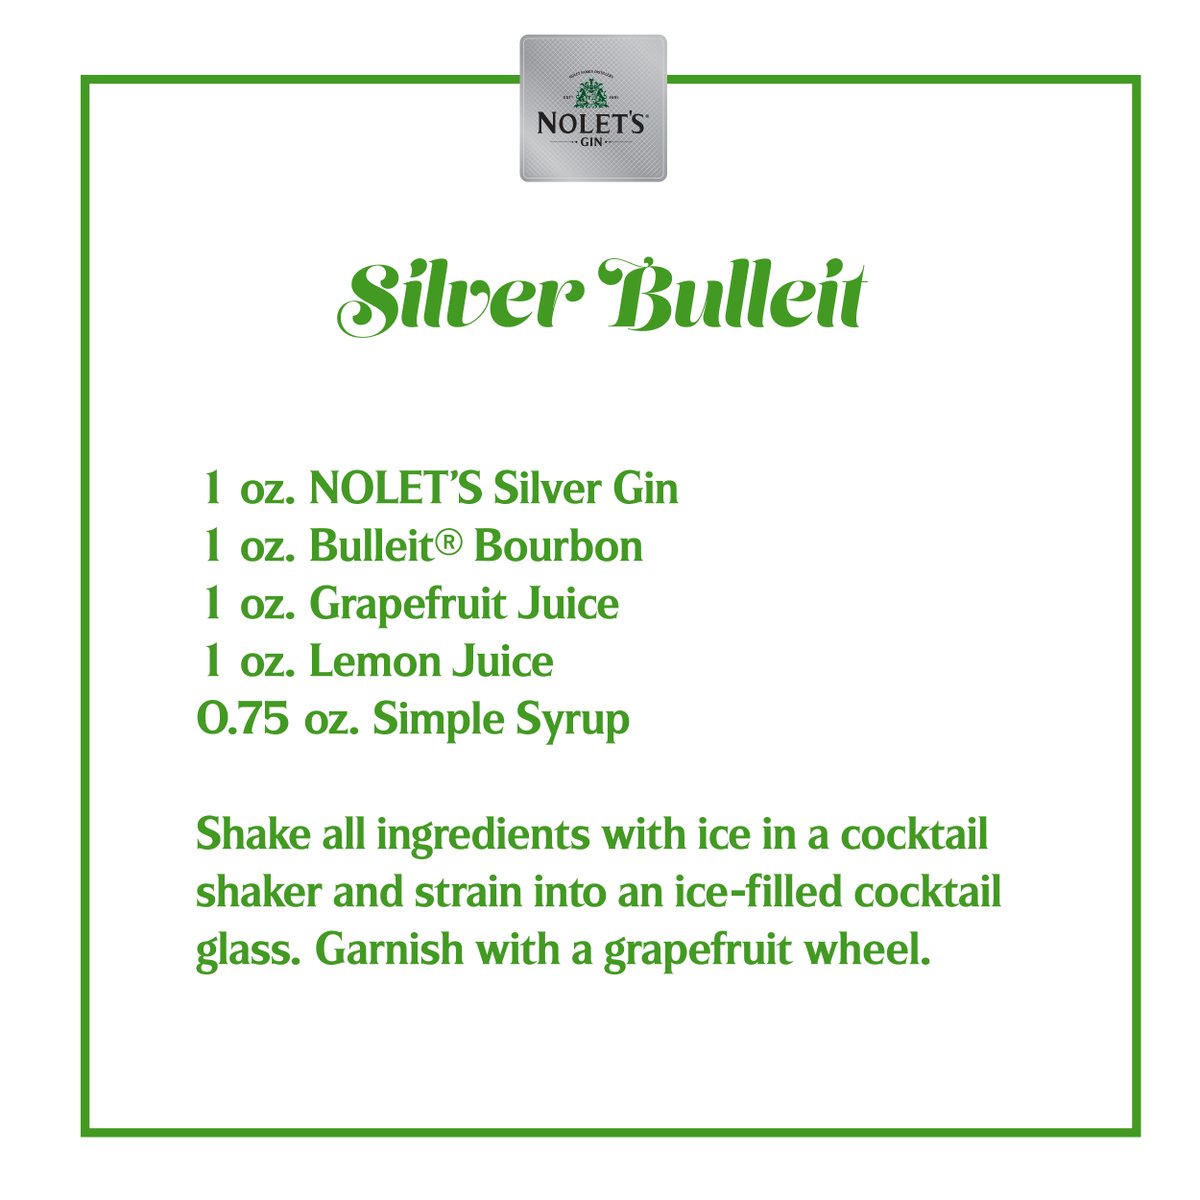 The Super Bowl isn't just a game. Whether you're hosting a big game bash or enjoying it from your couch, the NOLET'S Silver Bulleit Cocktail is your ticket to an unforgettable Super Bowl! Order a bottle online via noletsgin.com #NOLETS #GamedayRecipe #SuperBowlLVIII